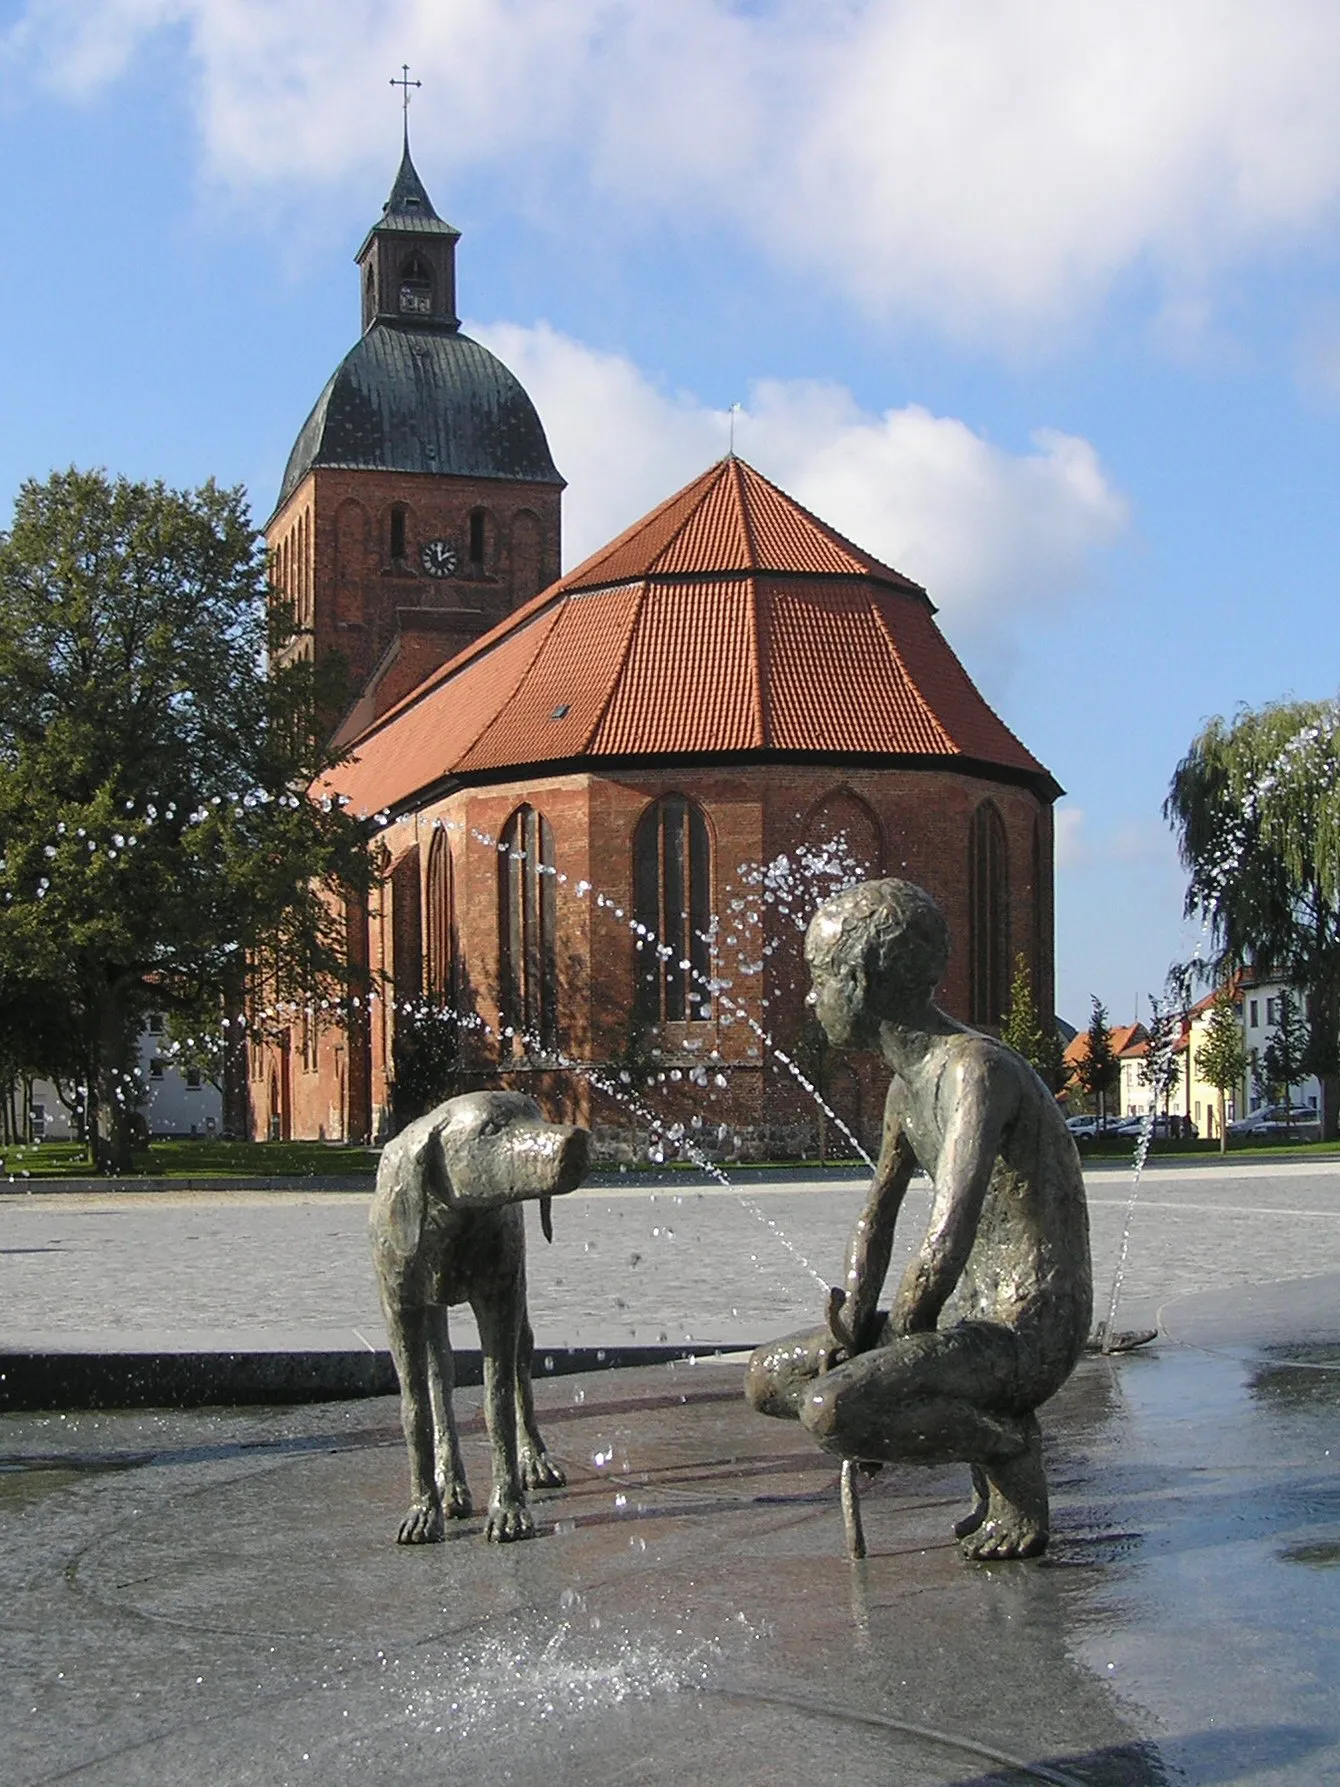 Photo showing: Market place in Ribnitz-Damgarten, Germany: view from the fountain to St Mary's church. The Sculptures were made by Thomas Jastram. The fountain was produced by the Stone-Company Rechtglaub-Wolf from the Hanseatic town of Lübeck.